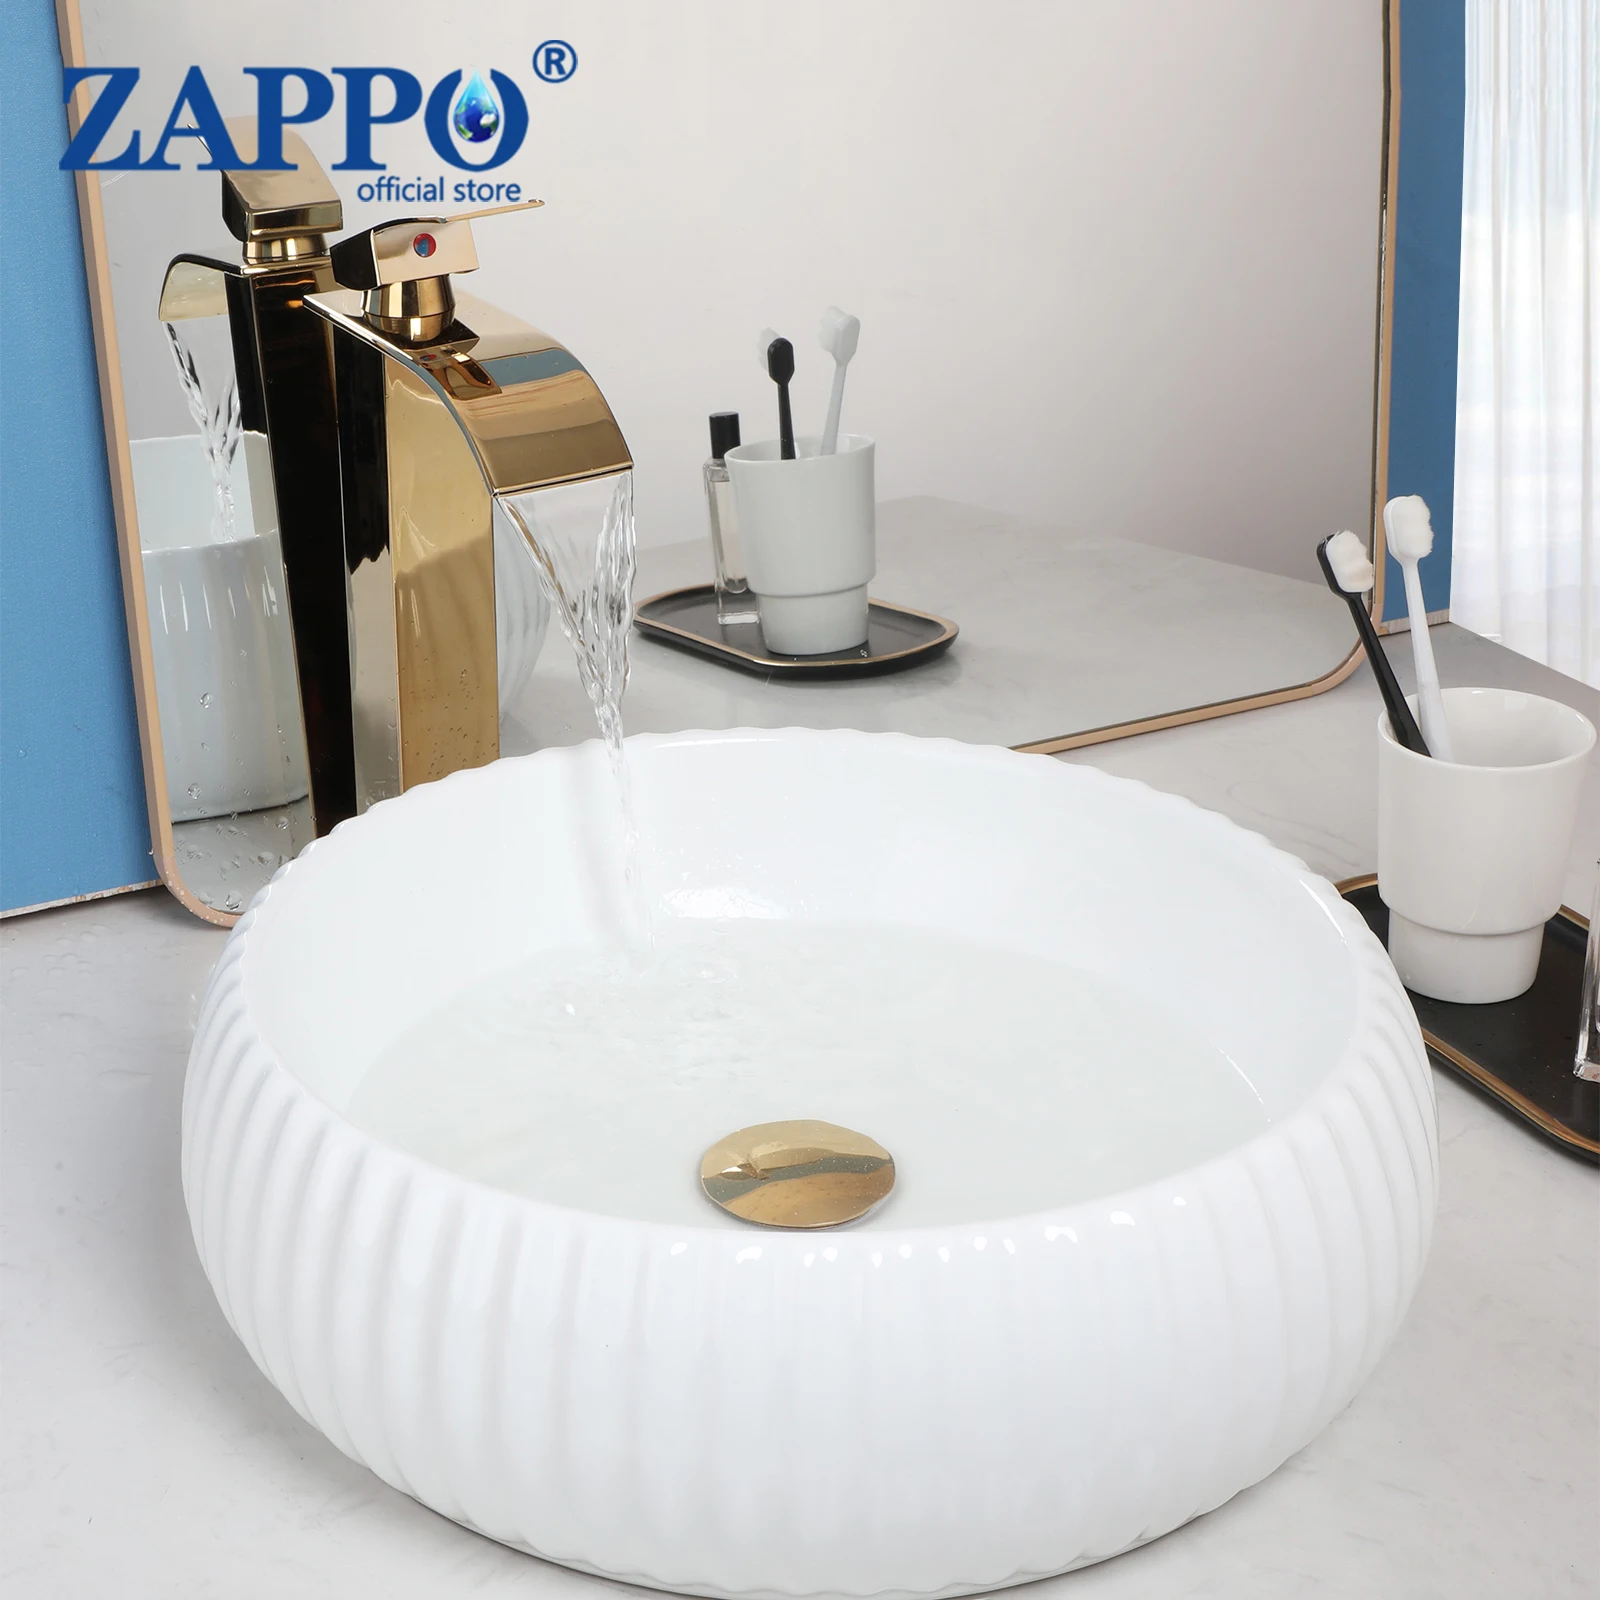 

ZAPPO Ceramic Bathroom Bar Vanity Vessel Sinks Above Counter Round Bowl White Countertop Sink Art Basin with Gold Faucet Drain